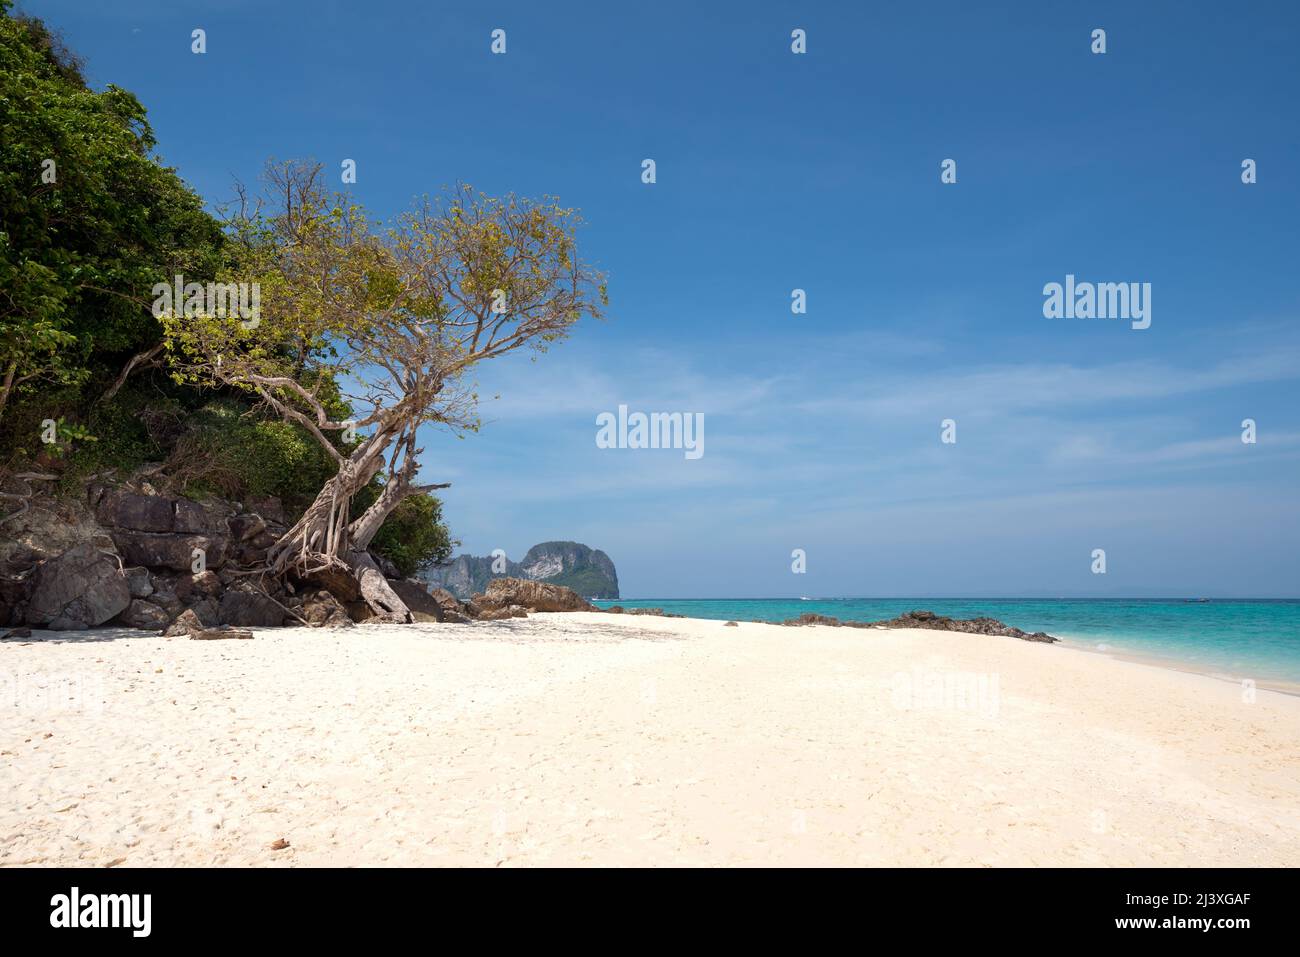 Exotic tree on a empty tropical island beach with sea view. Exotic Landscape. Bamboo Island, Thailand (Koh Phai) Stock Photo